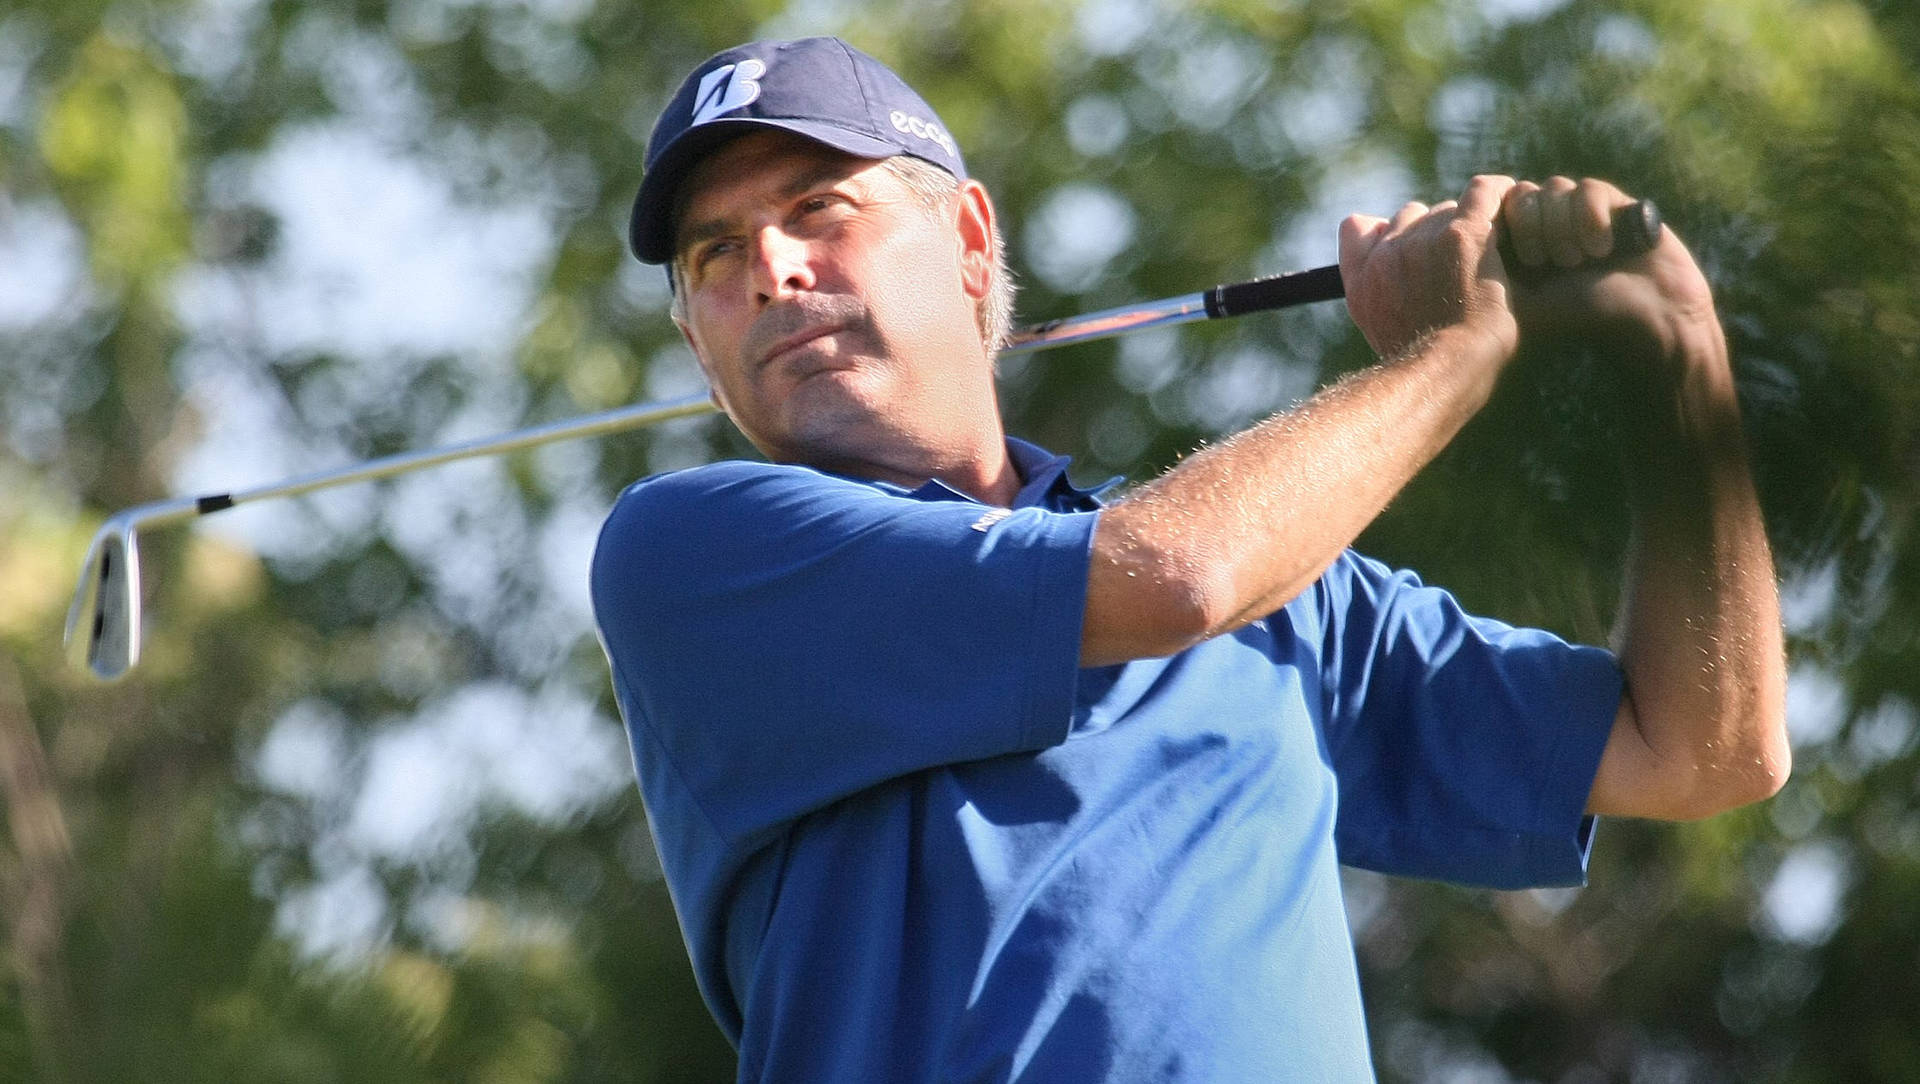 Fred Couples Golf Swing Pose Wallpaper